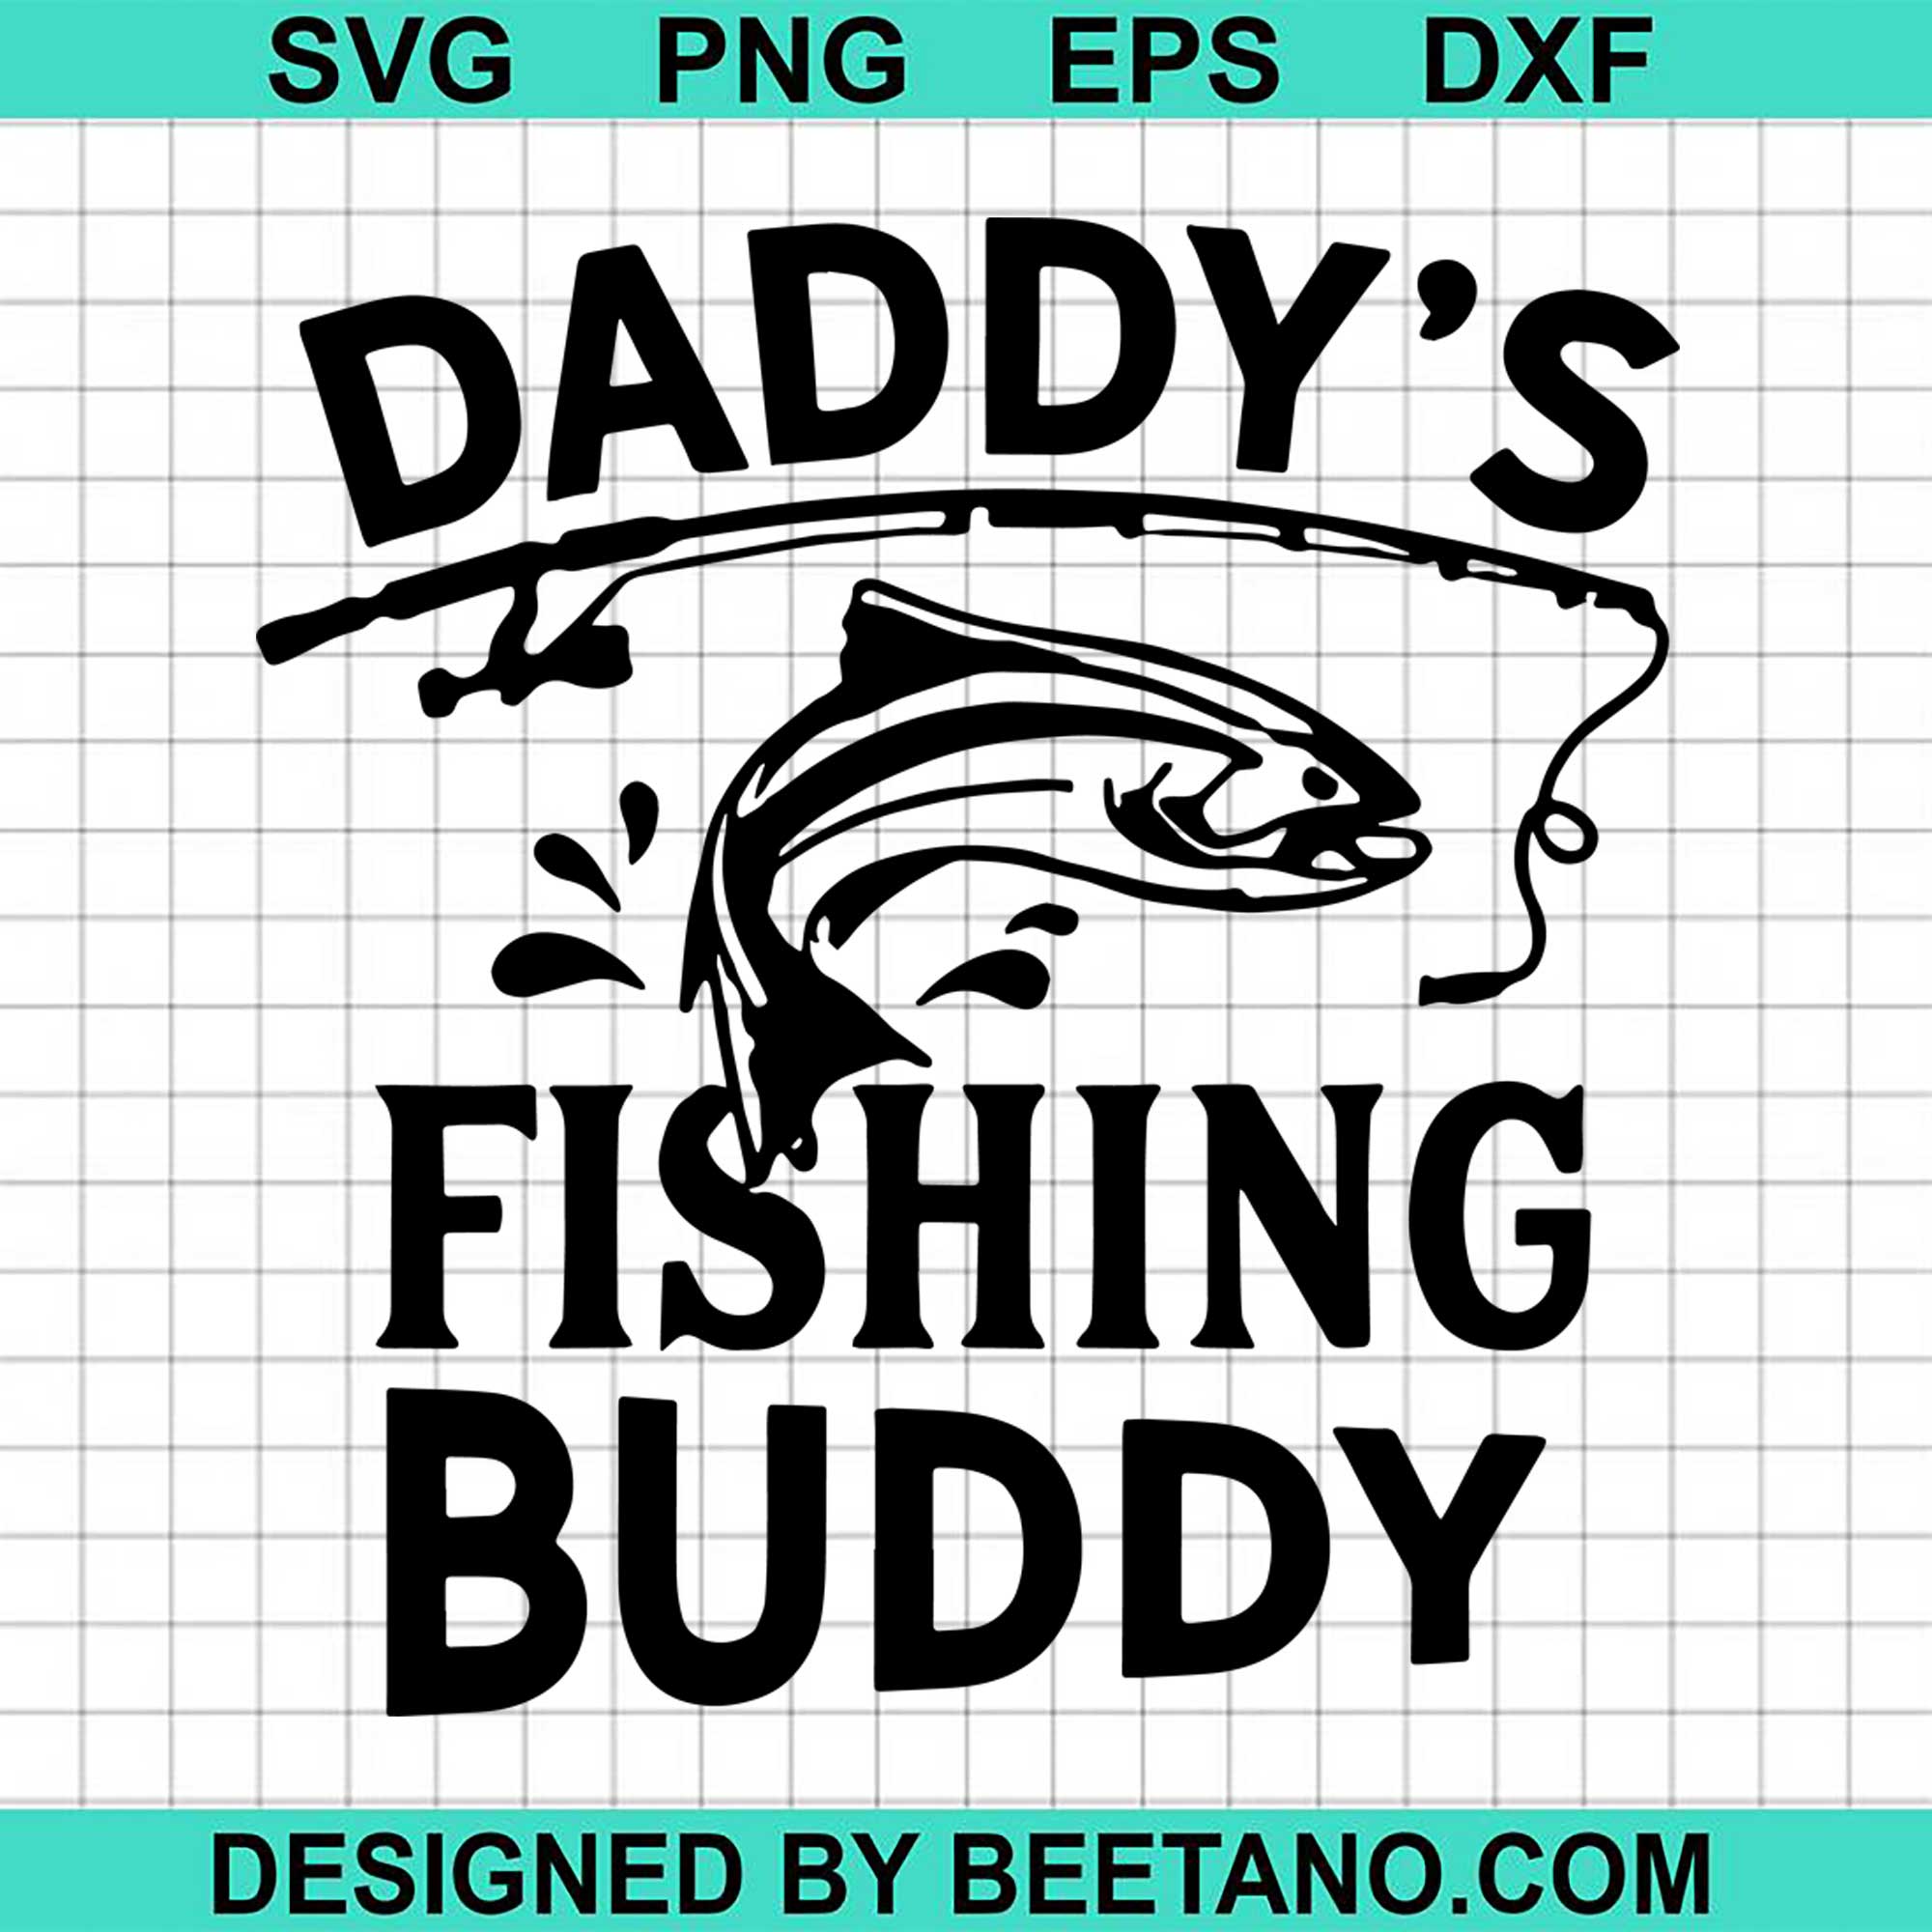 Download Daddy Fishing Buddy Svg Cut File For Cricut Silhouette Machine Make Cr Beetanosvg Scalable Vector Graphics